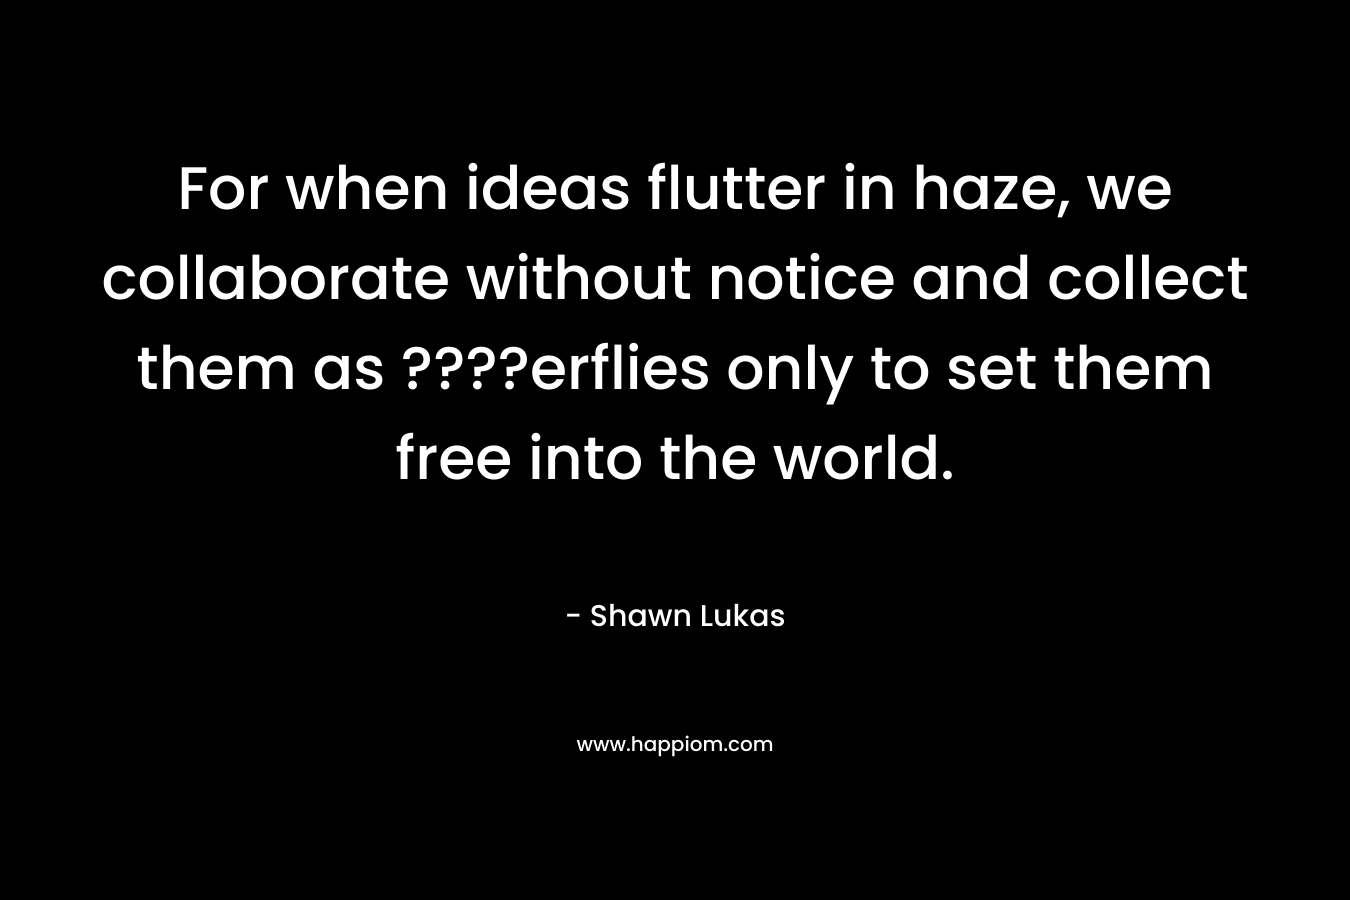 For when ideas flutter in haze, we collaborate without notice and collect them as ????erflies only to set them free into the world.